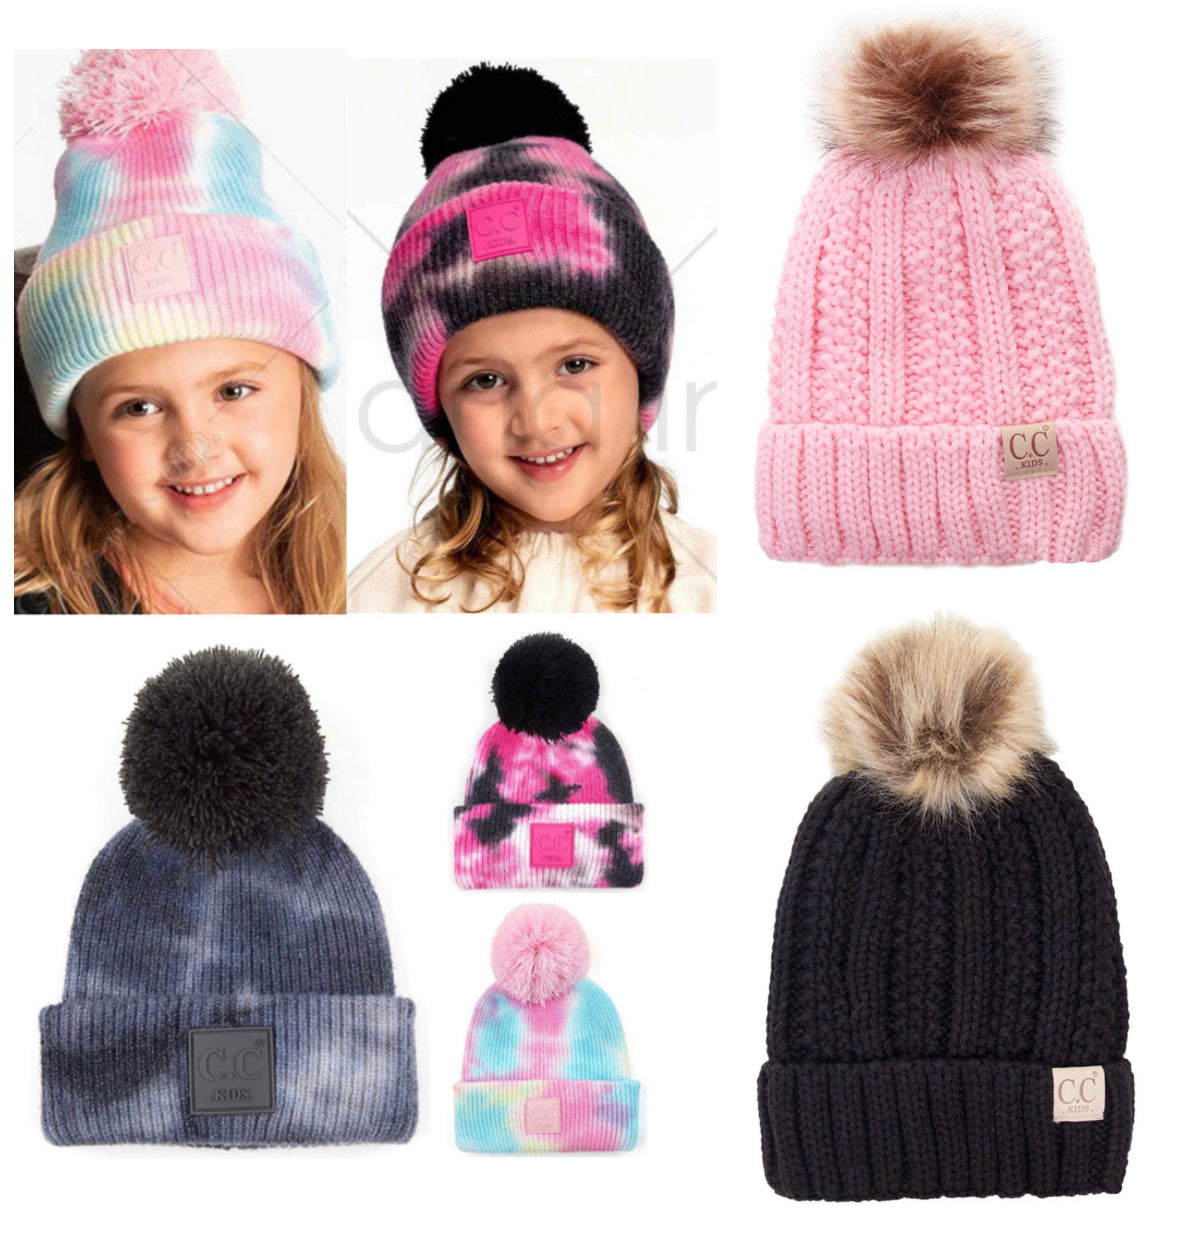 CC kid's size winter hats (assorted styles/colors)